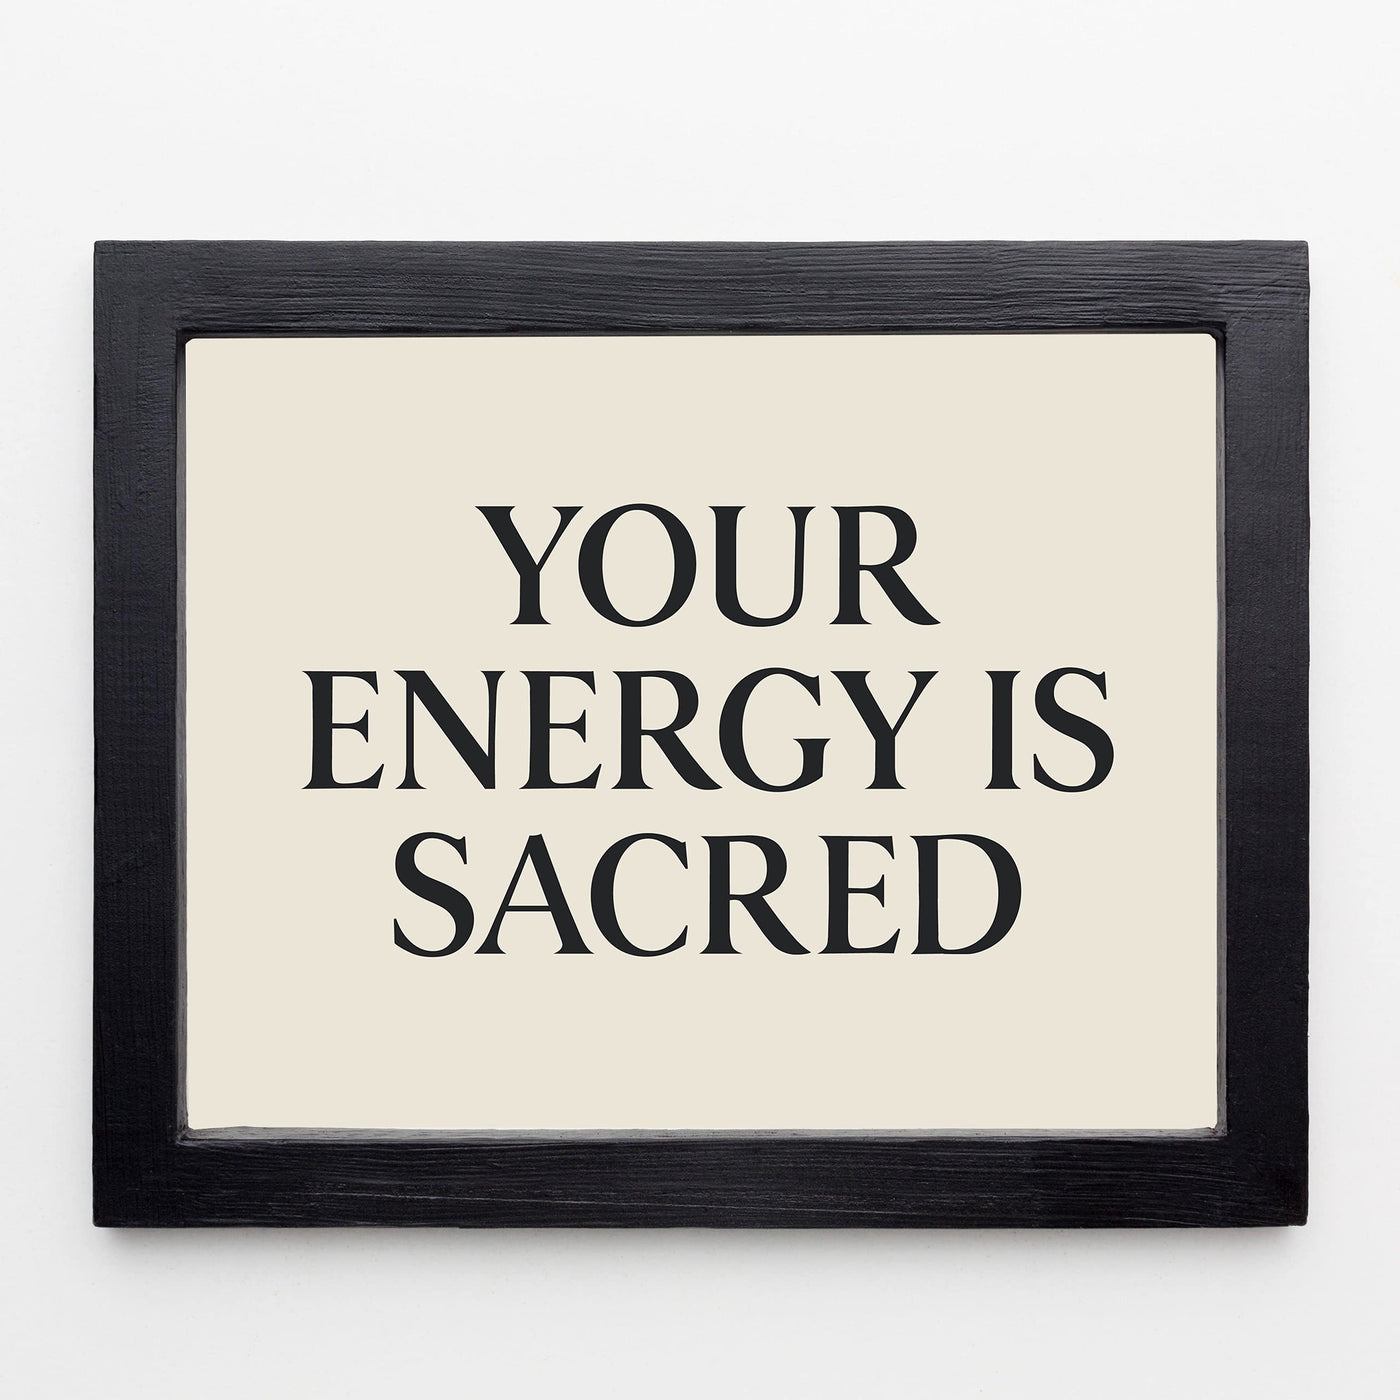 Your Energy Is Sacred Spiritual Quotes Wall Art- 10 x 8" Modern Typographic Print-Ready to Frame. Inspirational Home-Studio-Dorm-Meditation-Zen Decor! Great Gift & Positive Decoration for All!